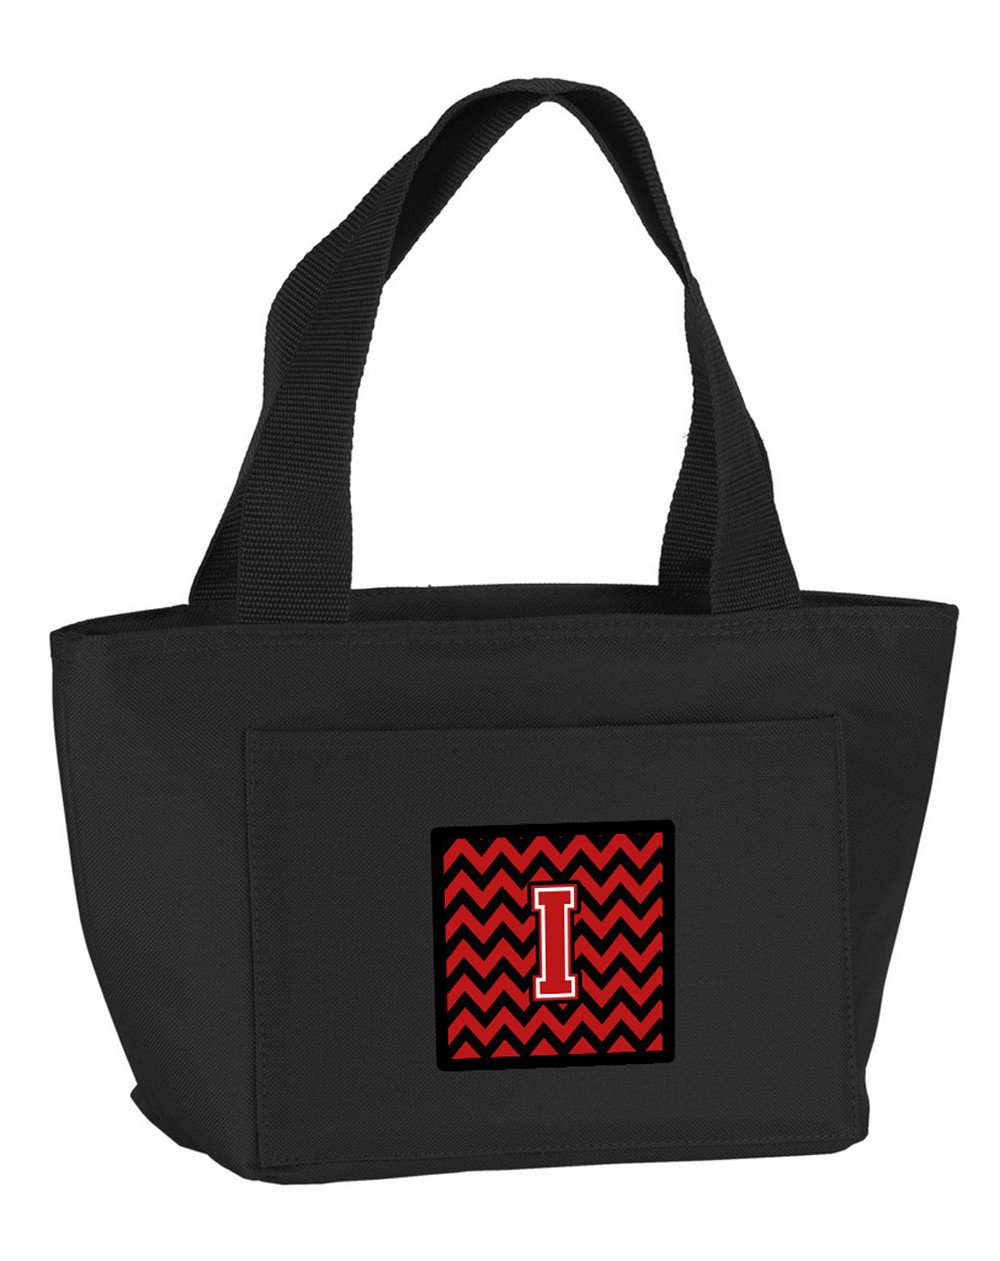 Letter I Chevron Black and Red   Lunch Bag CJ1047-IBK-8808 by Caroline's Treasures